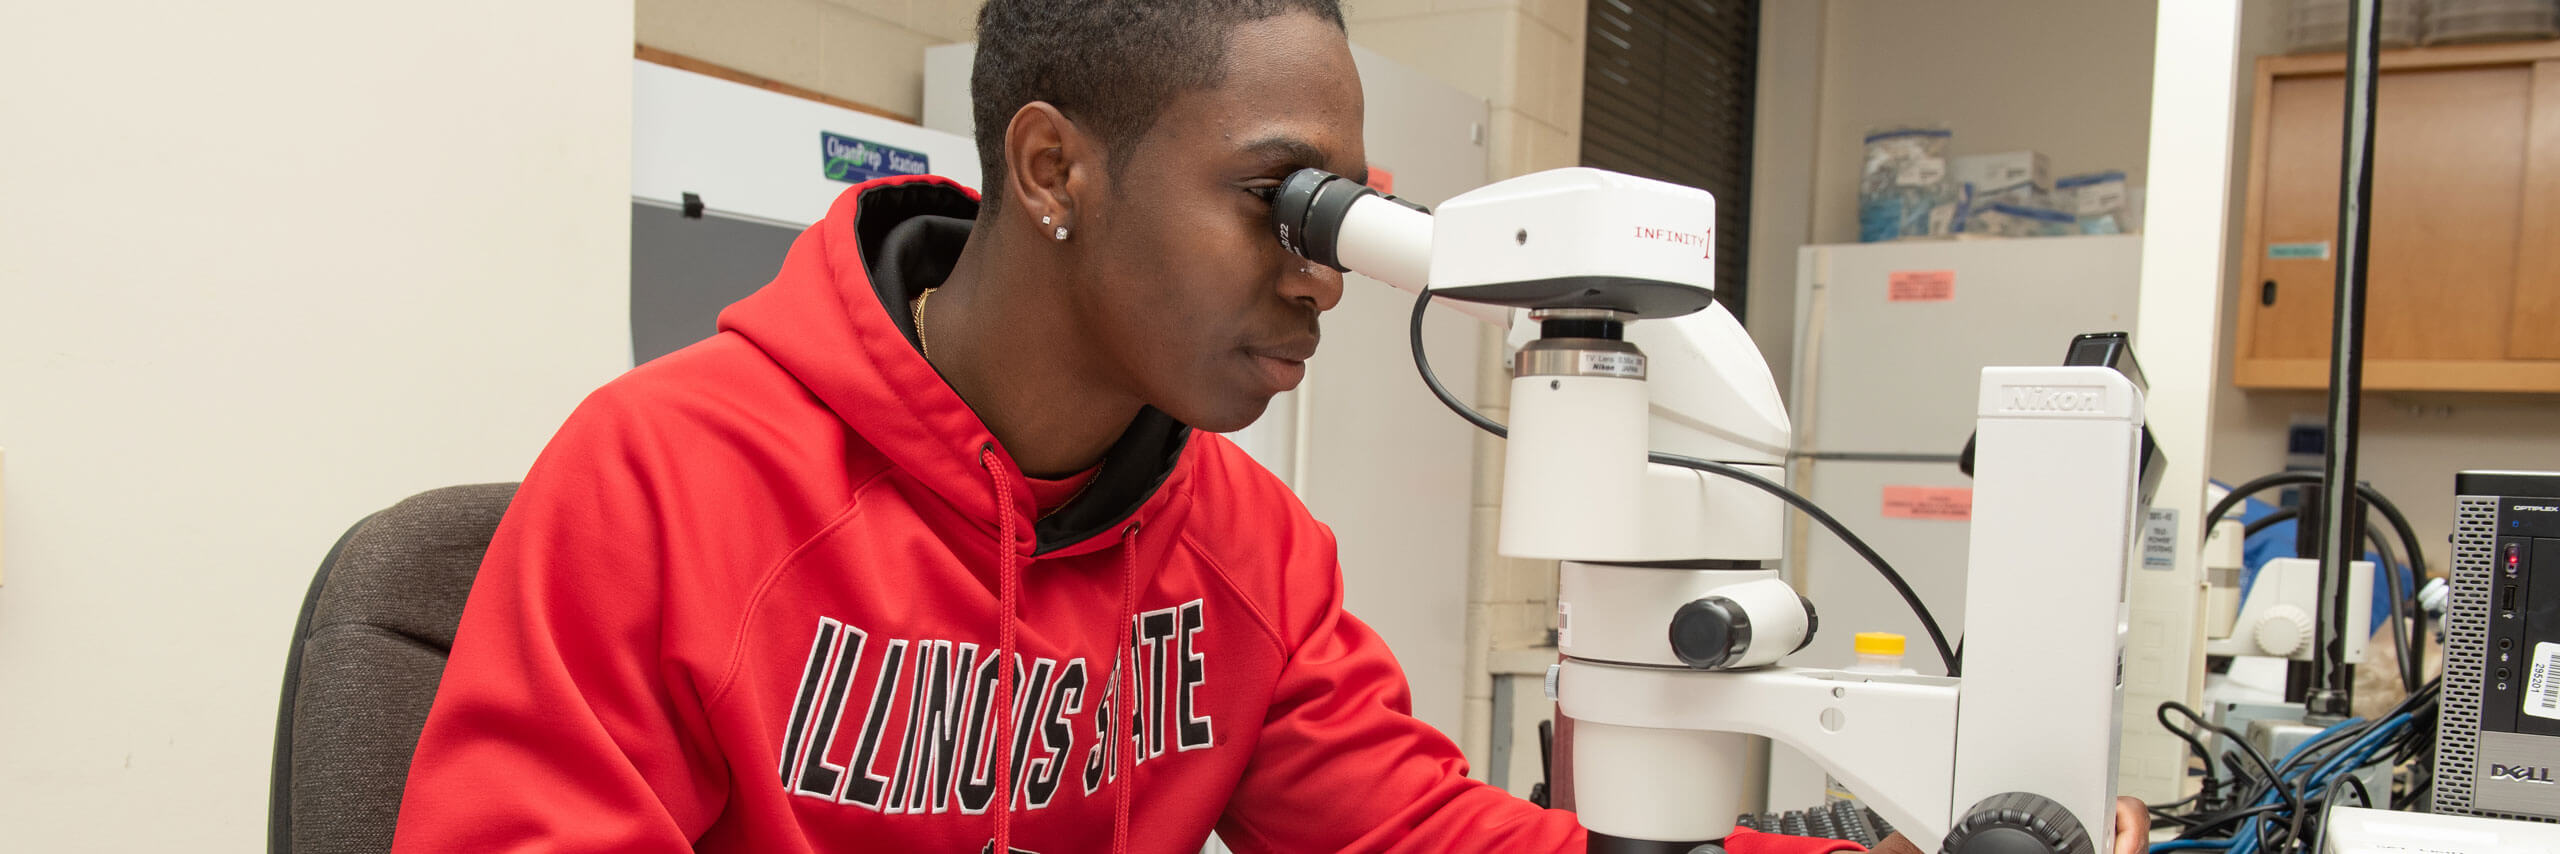 Student looks into a microscope.